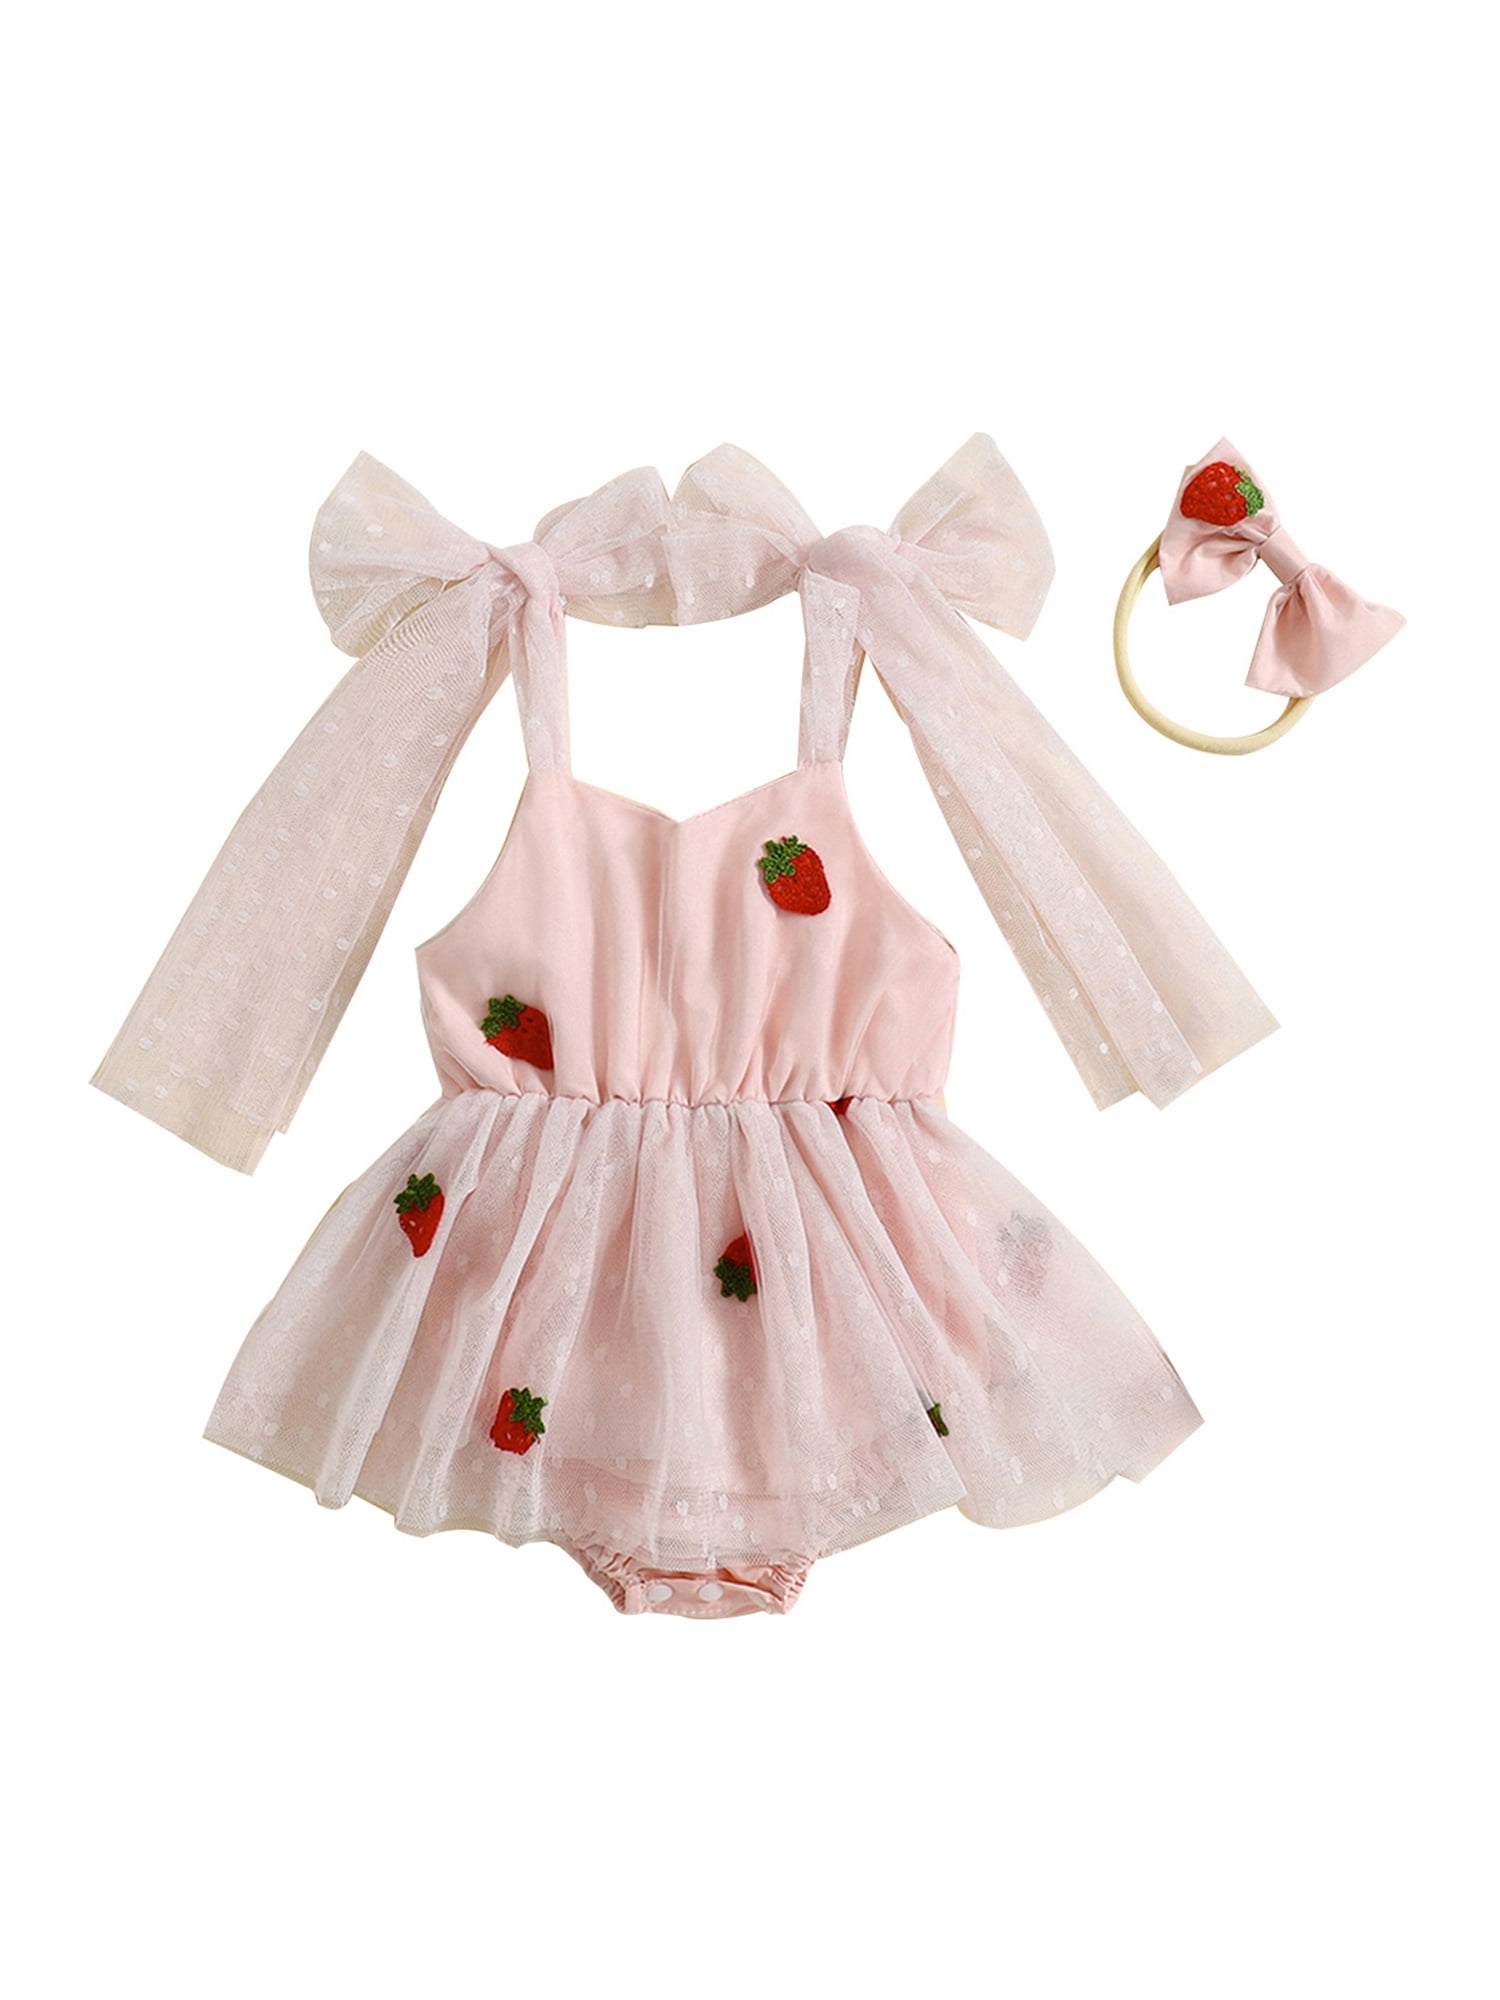 Tsseiatte Infant Toddler Girls Jumpsuit Tie Strap Strawberry Embroidery ...